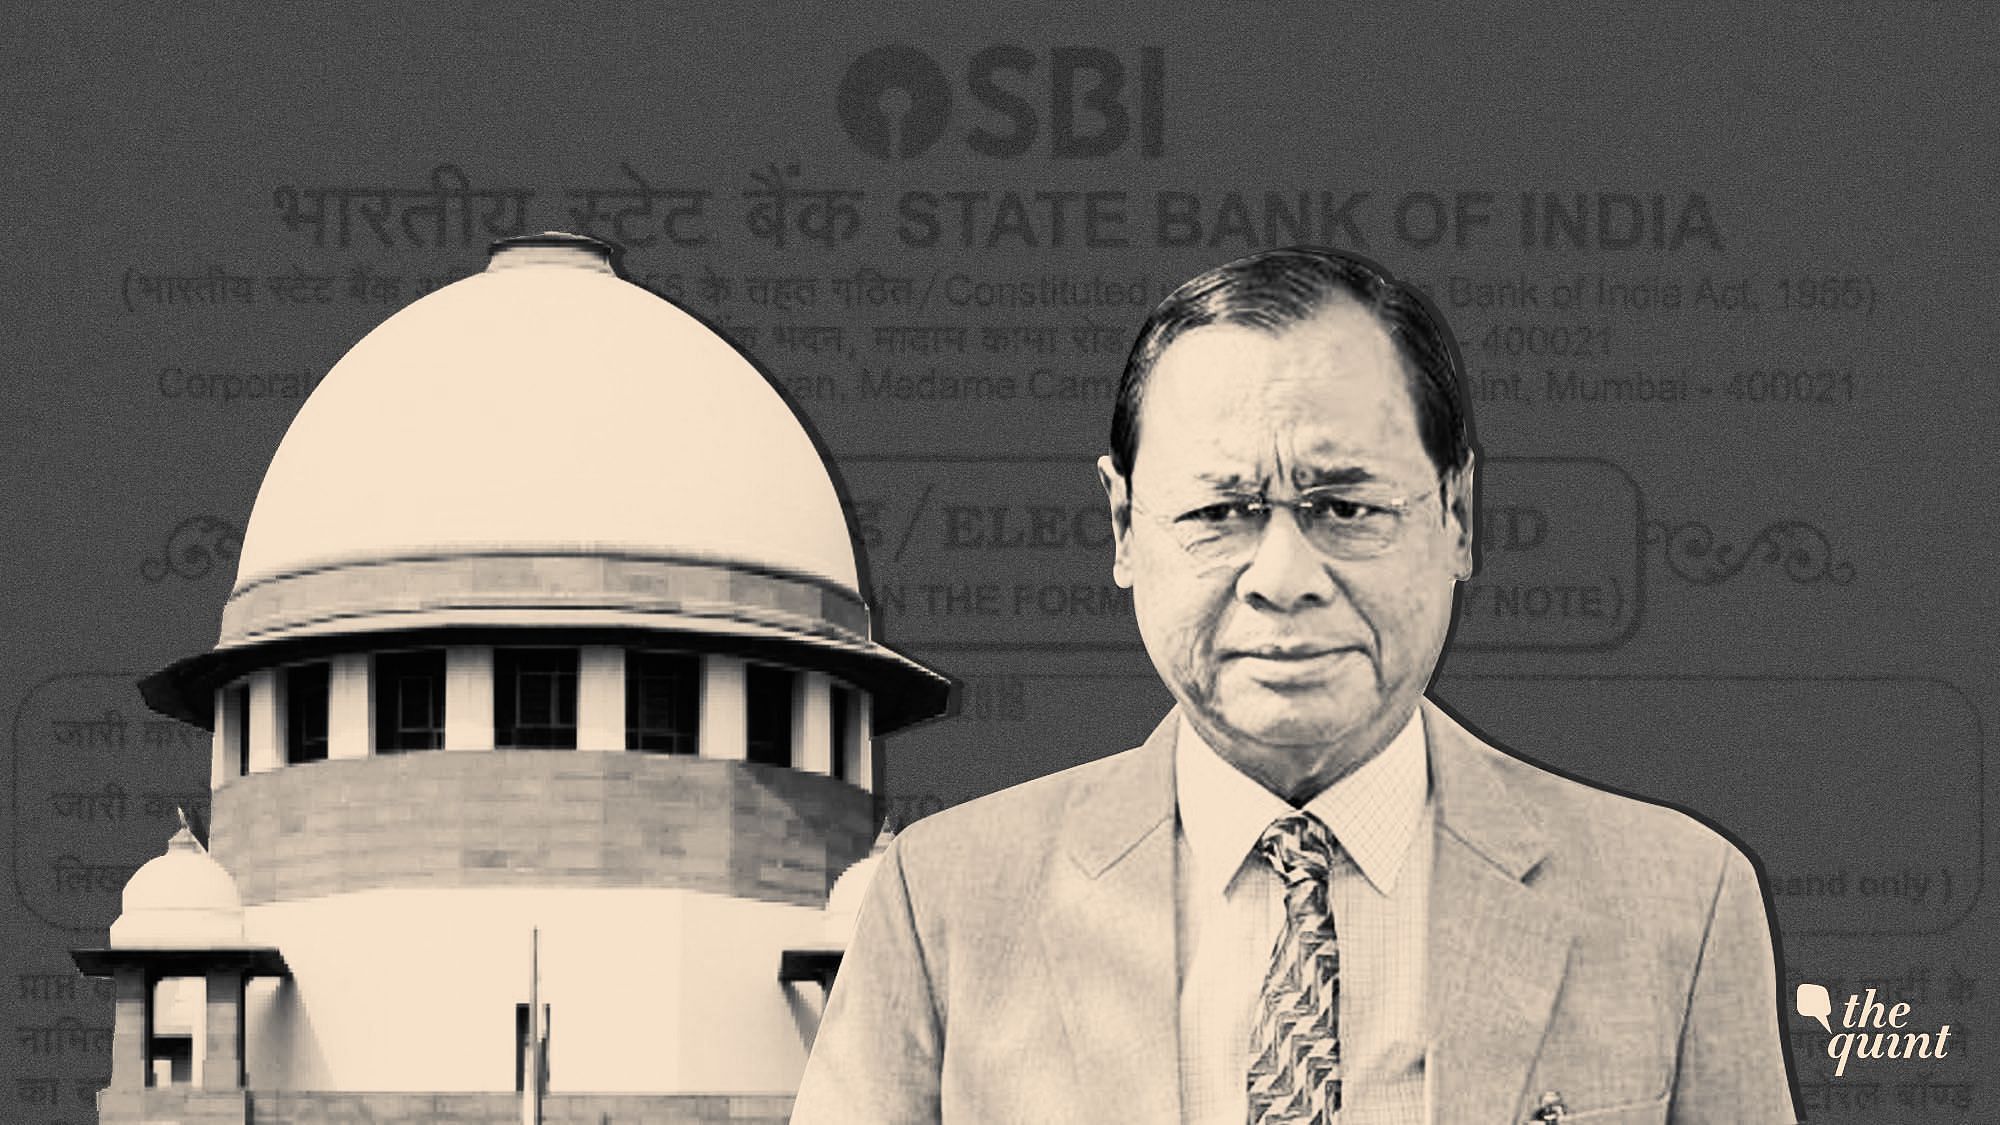 CJI Ranjan Gogoi pronounced the SC’s decision refusing a stay on the electoral bonds scheme on Friday.